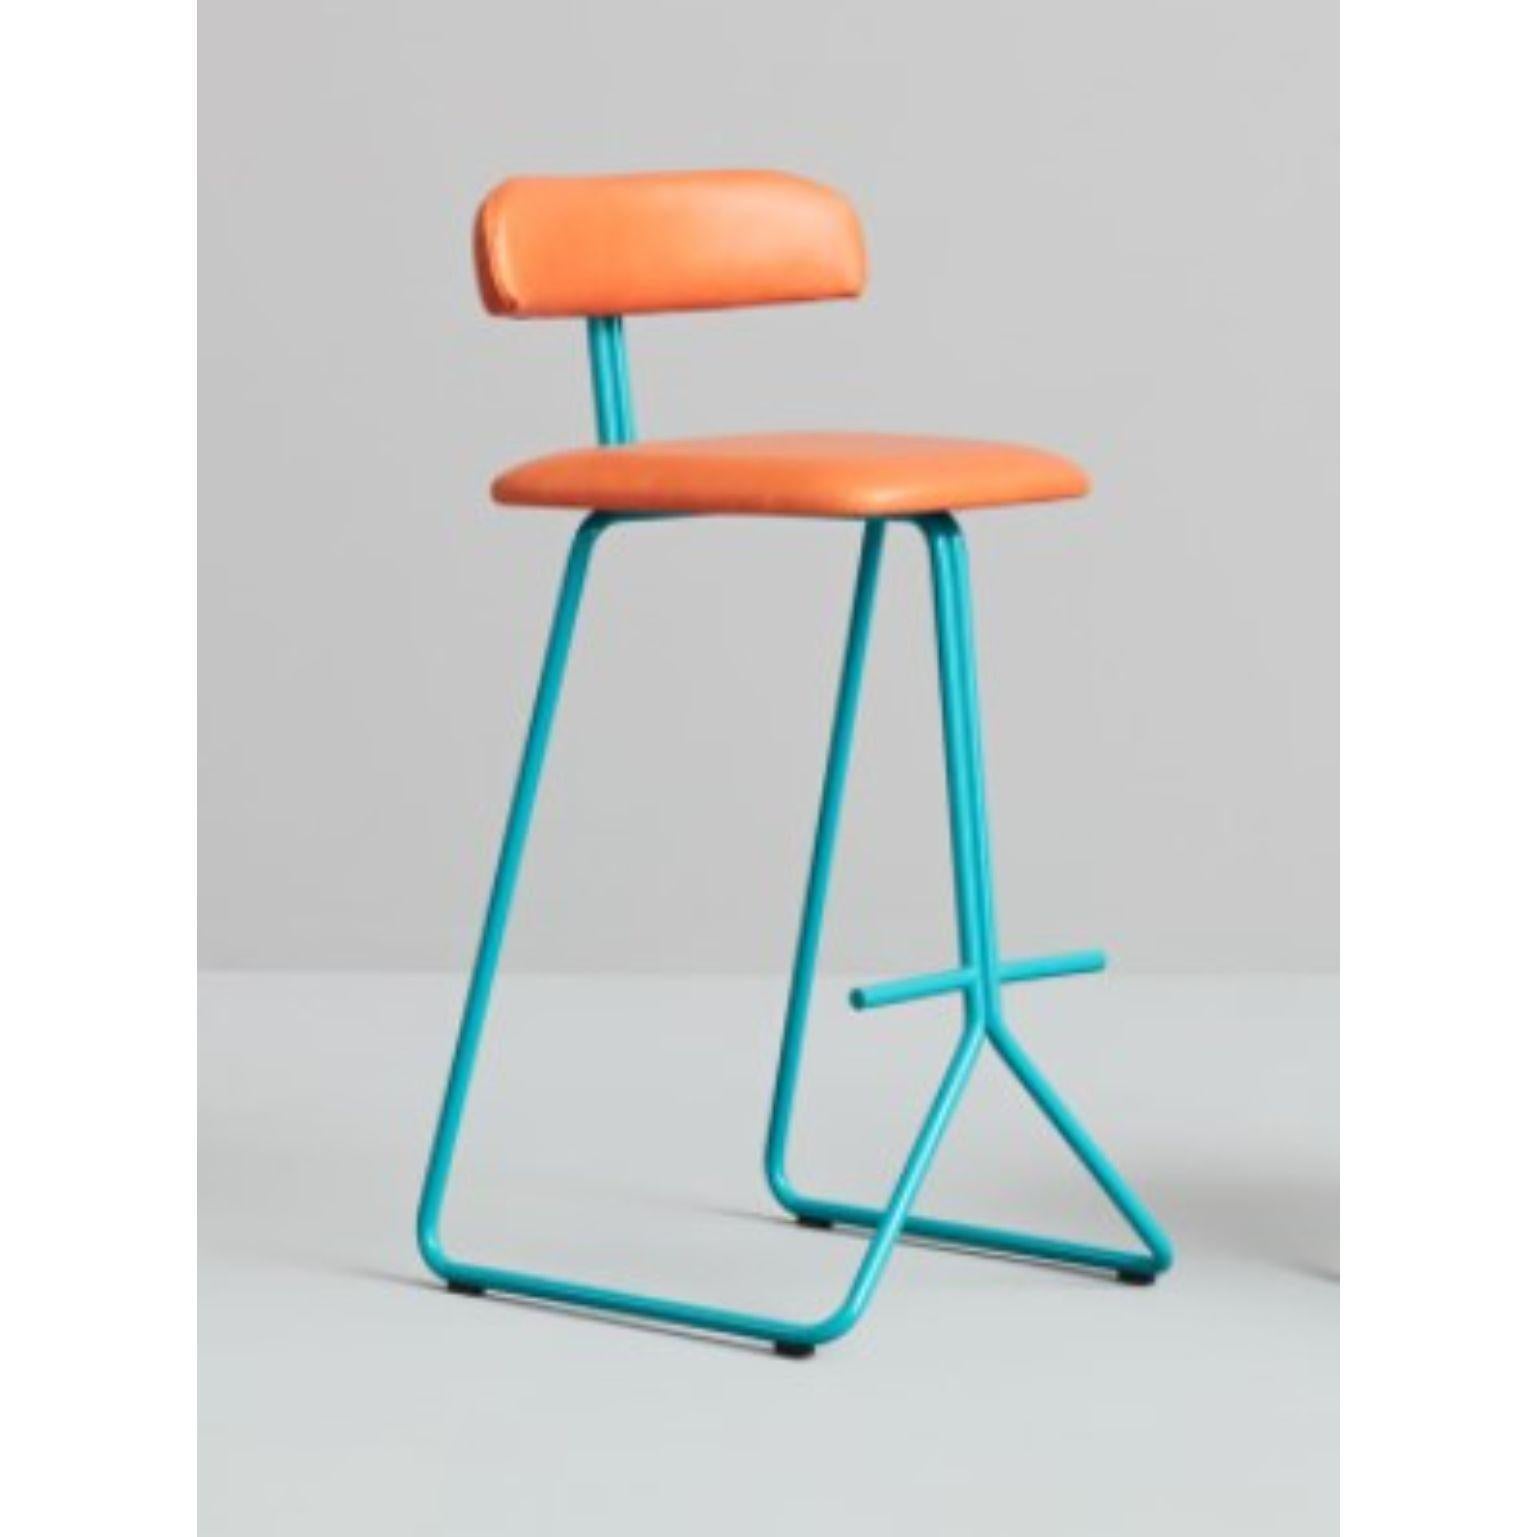 Rider stool by Pepe Albargues
Dimensions: W 50, D 56, H 104, Seat78
Materials: Crome plated or painted iron structure
Foam CMHR (high resilience and flame retardant) for all our cushion filling systems
Copper(gloss-matt) finishings

Also